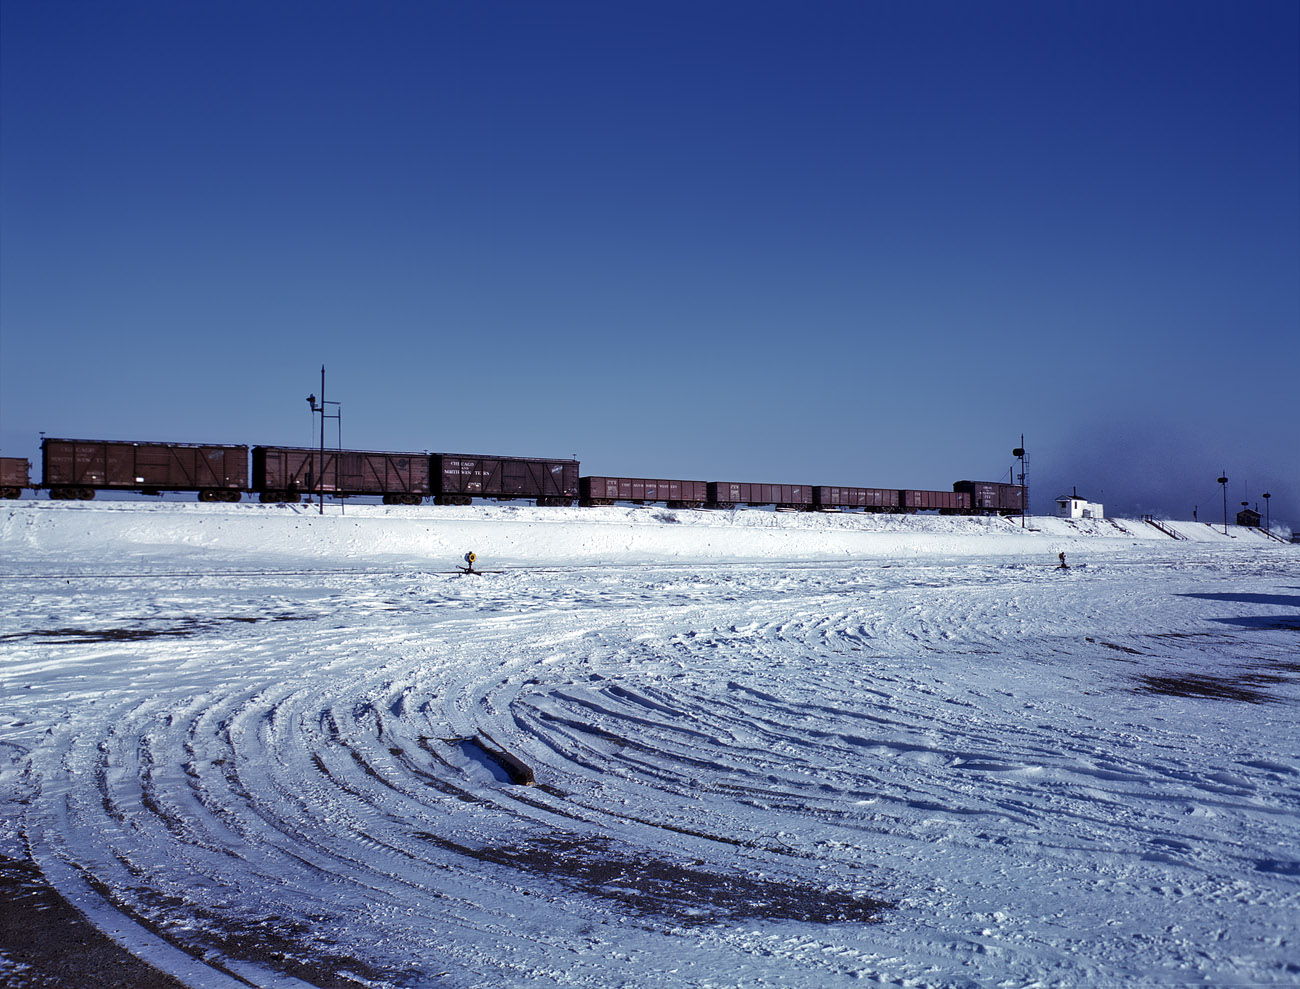 December 1942. Train going over the hump at the Chicago & North Western Proviso Yard. View full size. 4x5 Kodachrome transparency by Jack Delano.